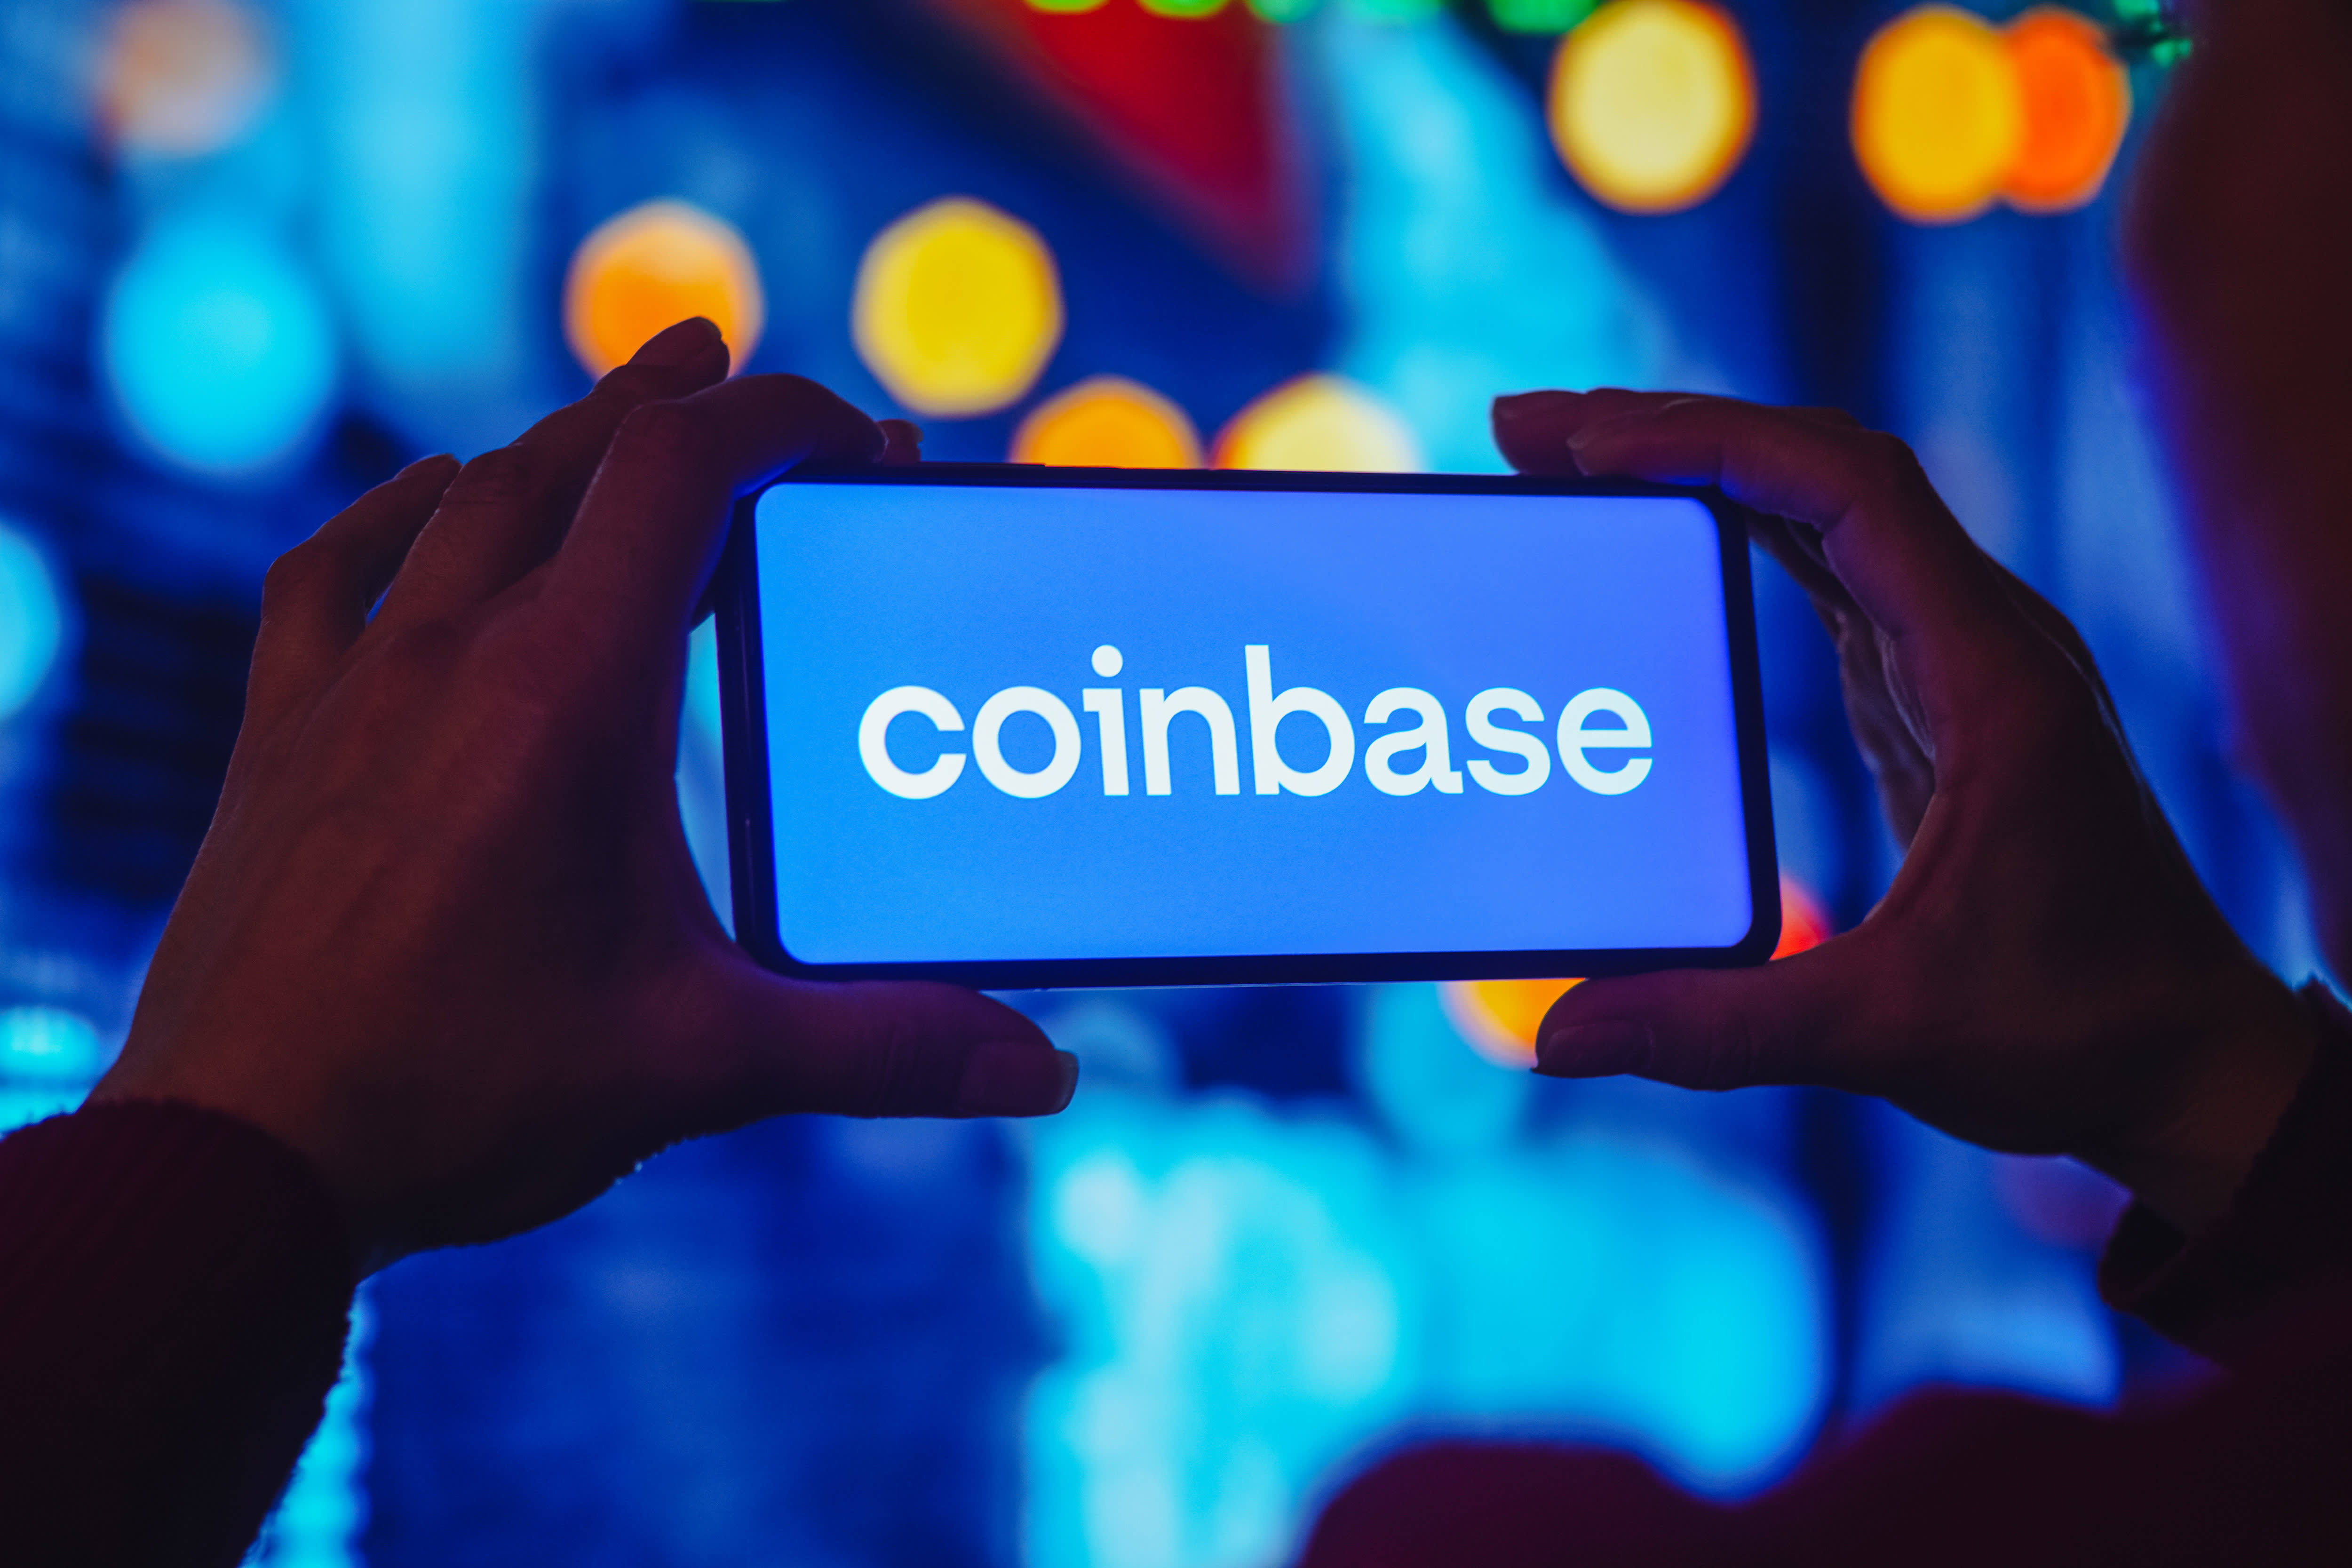 Analysts call Coinbase's ongoing regulatory battles a 'major roadblock,' say long-term outlook looks uncertain